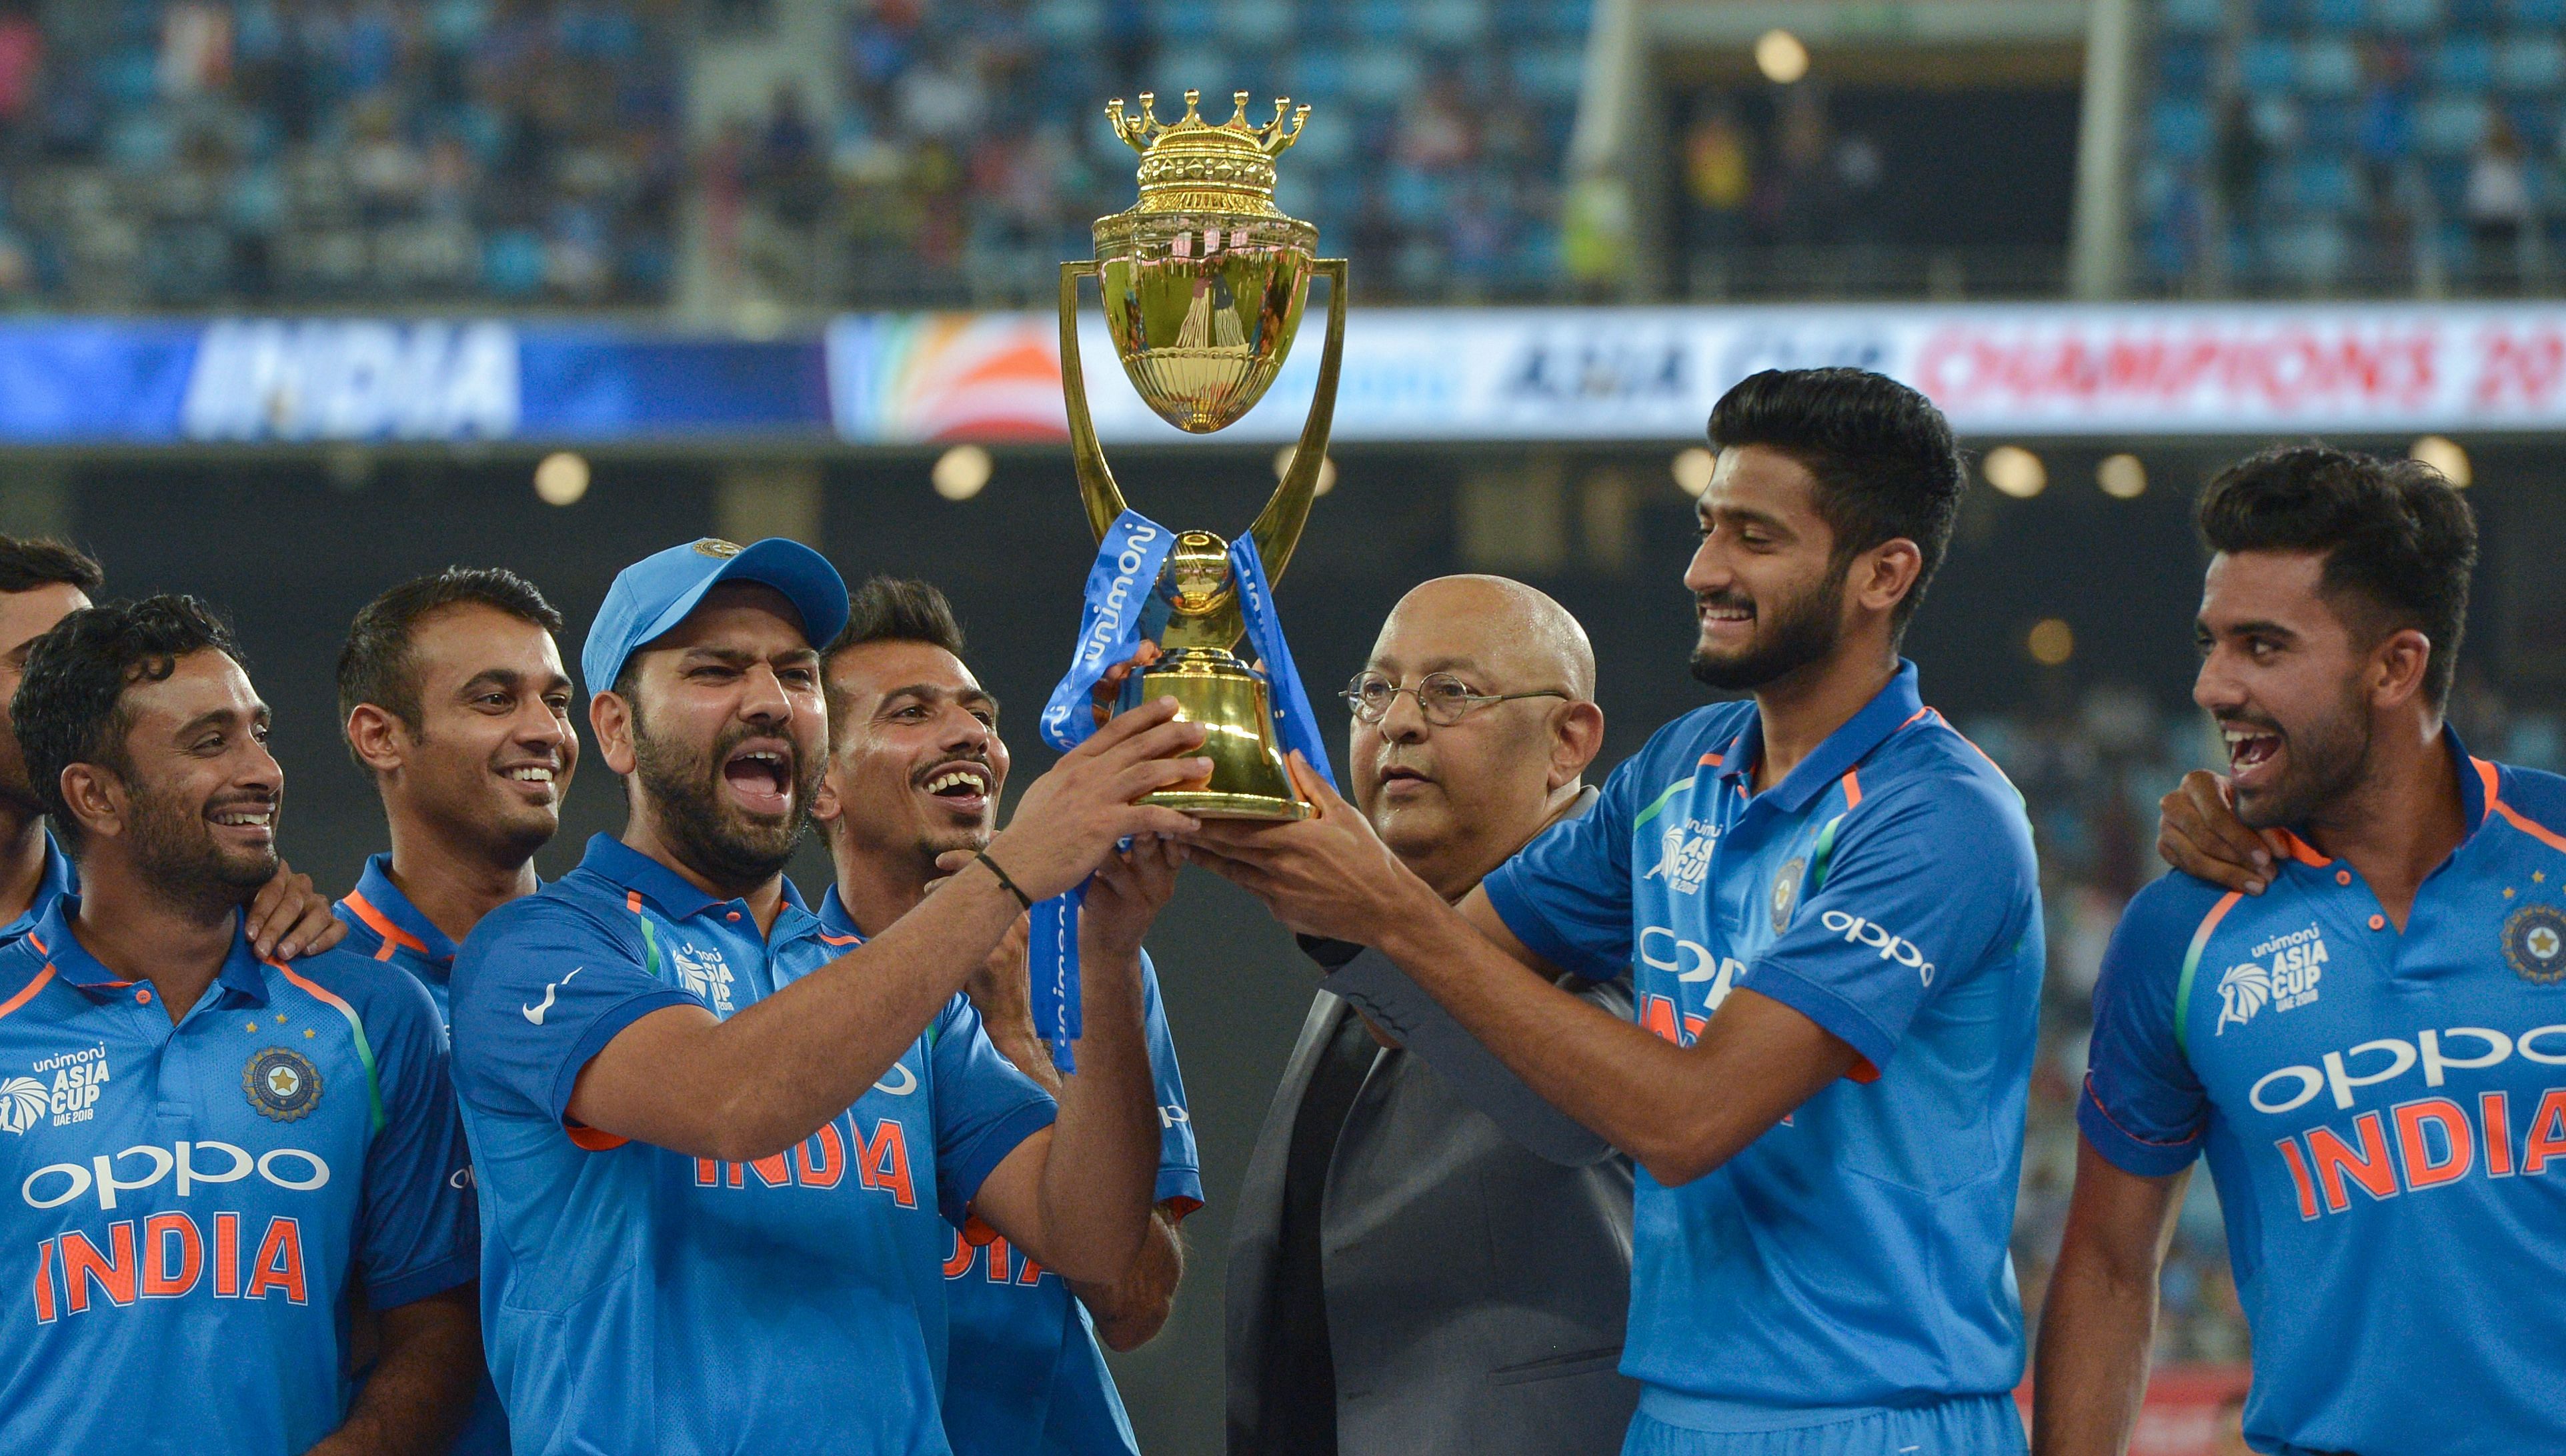 India captain Rohit Sharma and team celebrate after winning the Asia Cup at the Dubai International Cricket Stadium on Friday. (AFP)